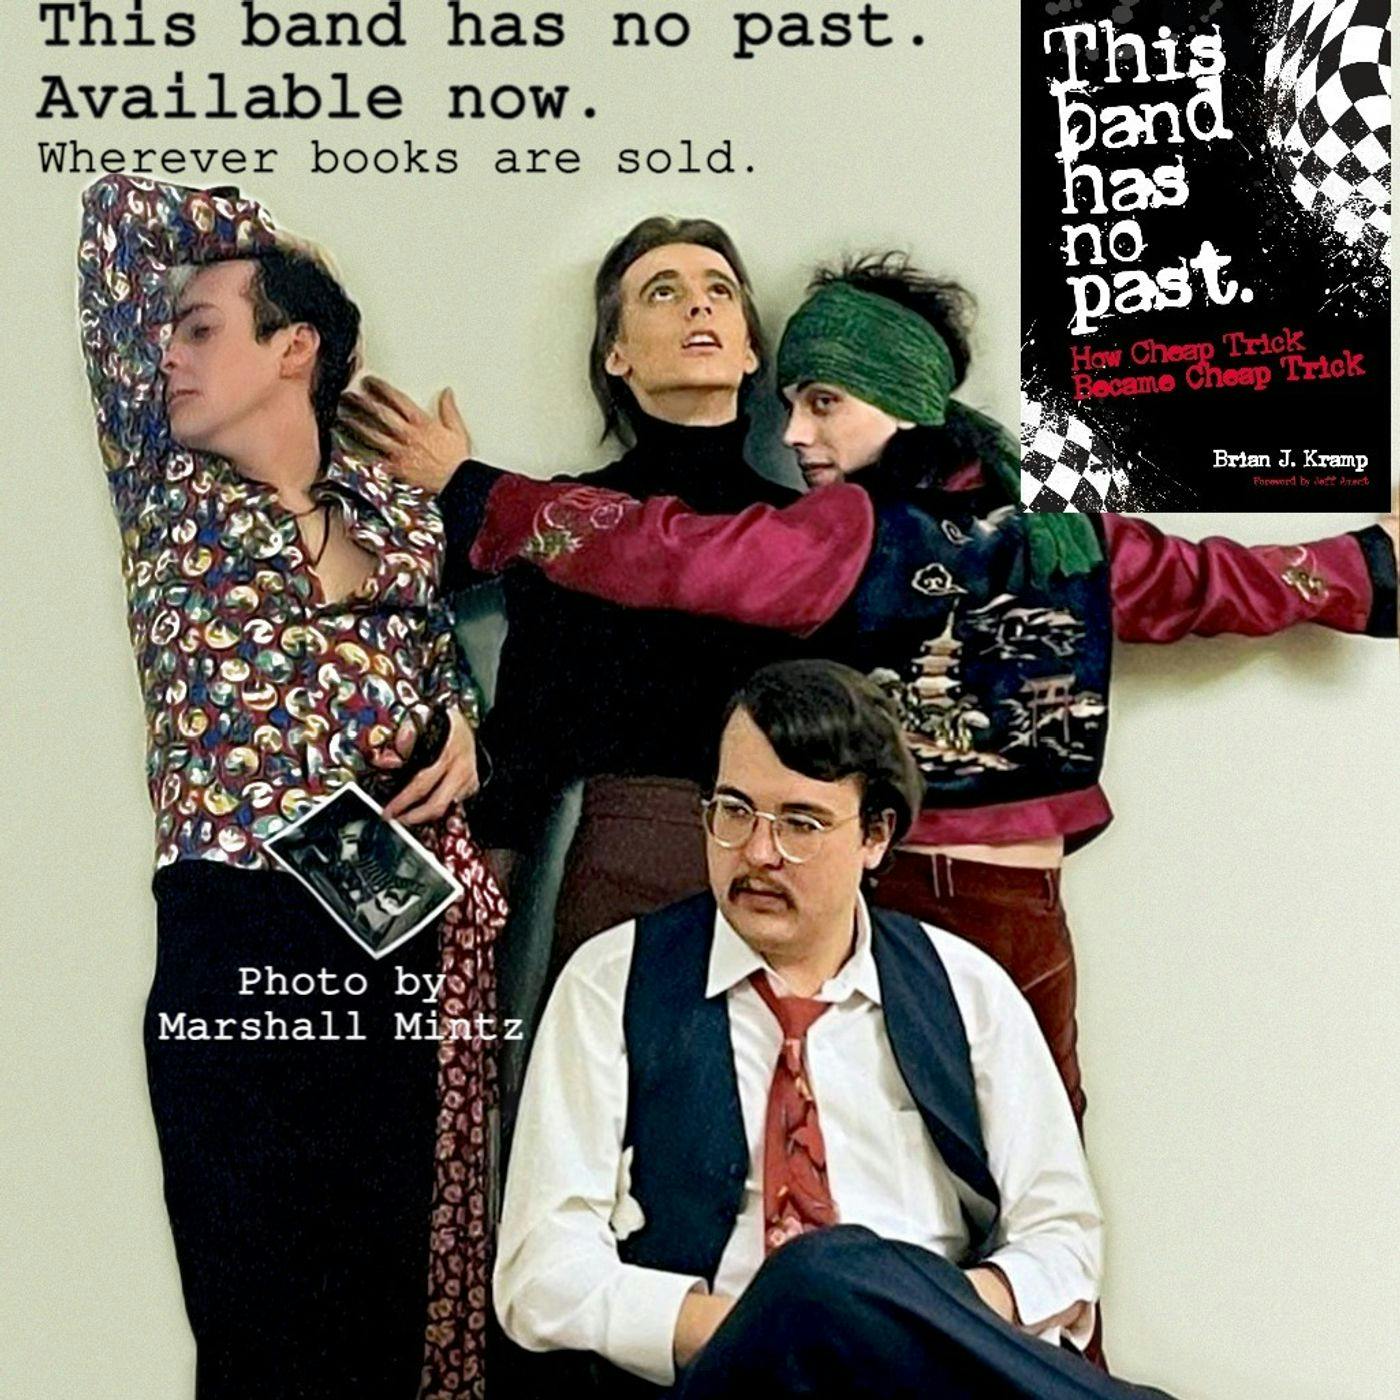 THE BOOK IS OUT! GET IT NOW! THIS BAND HAS NO PAST: HOW CHEAP TRICK BECAME CHEAP TRICK